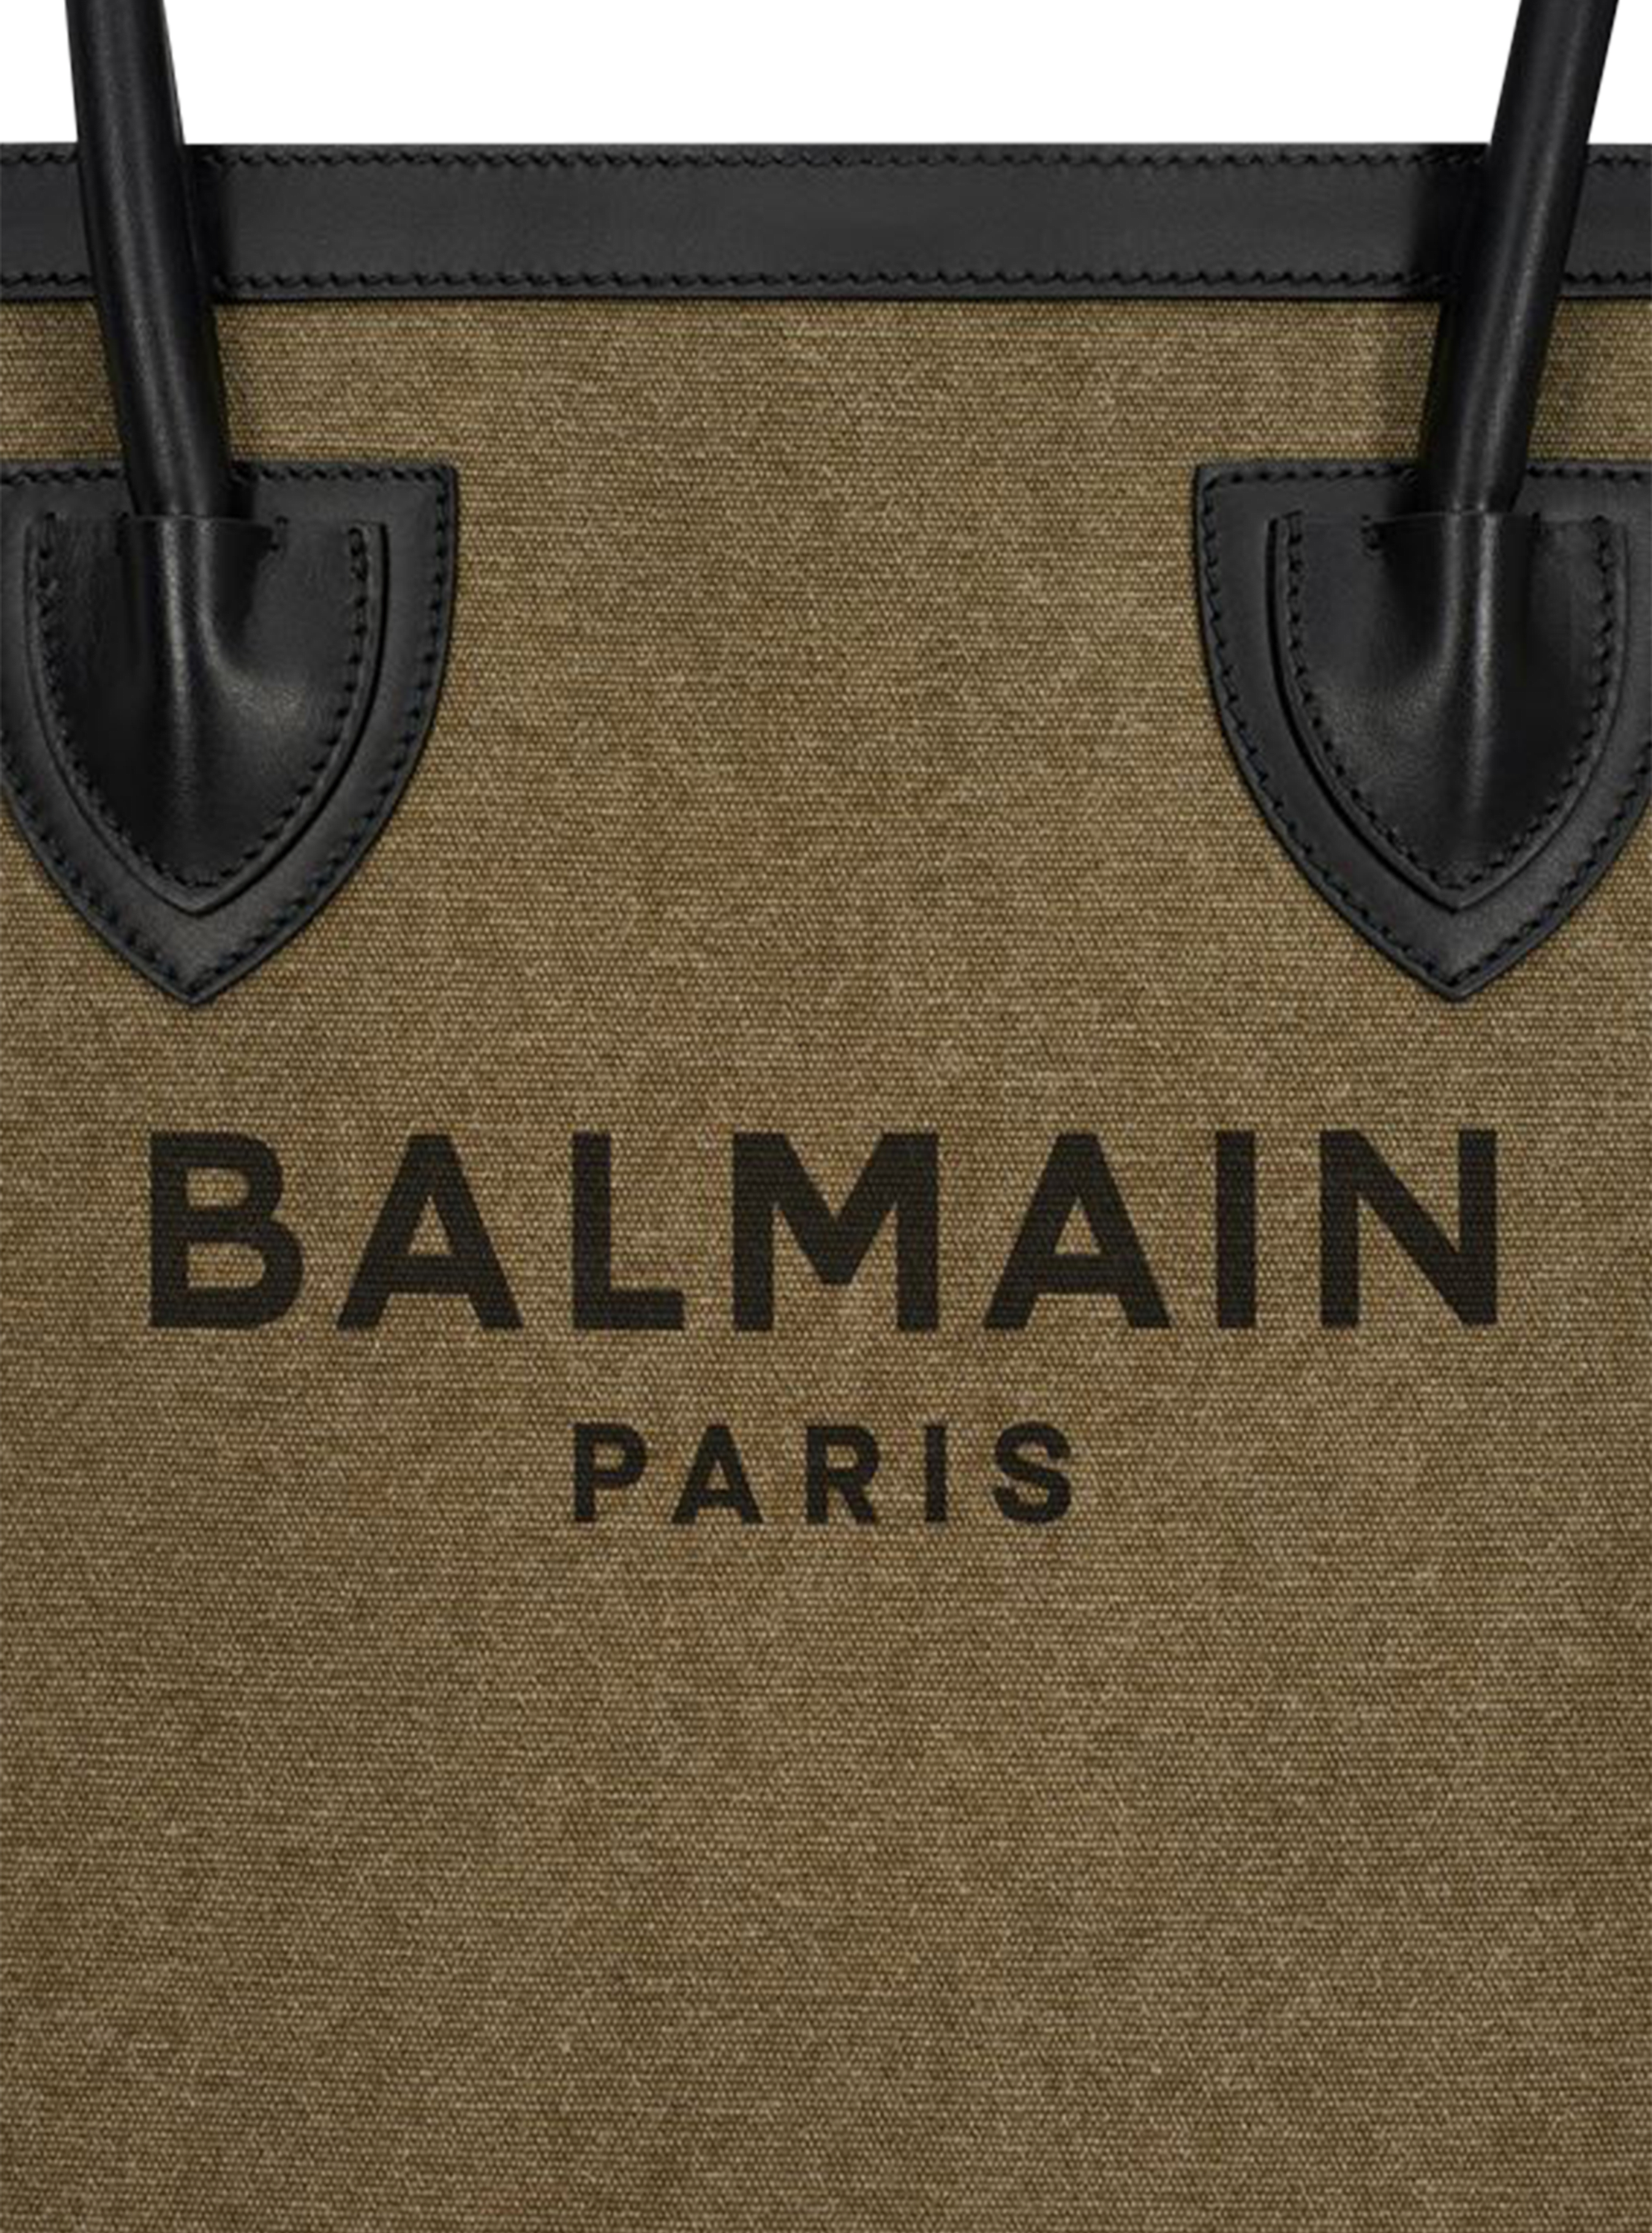 Balmain - Mini Reporter Bag in Canvas and Leather